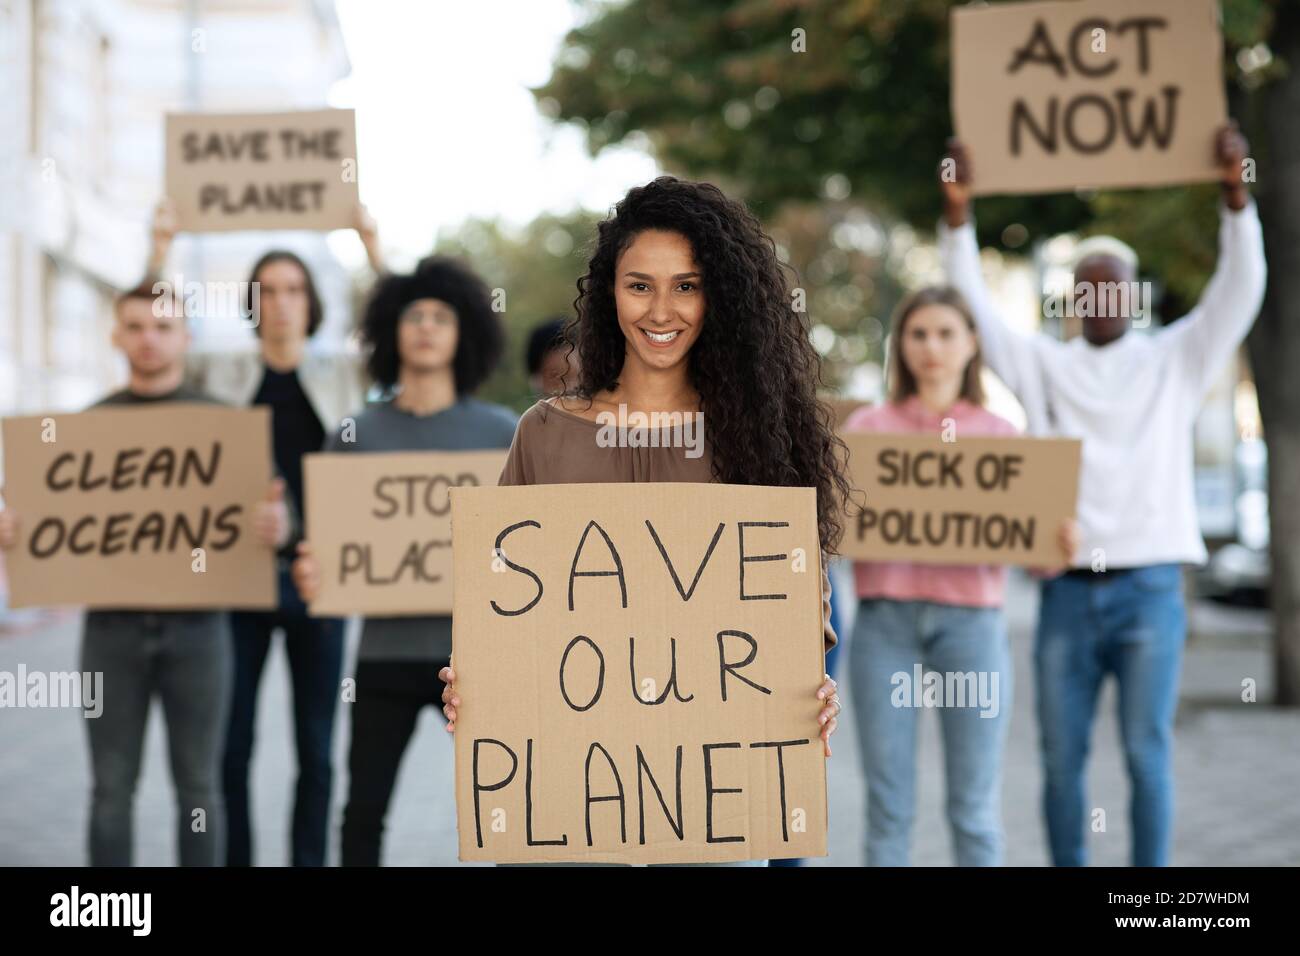 Cheerful lady with SAVE OUR PLANET placard Stock Photo